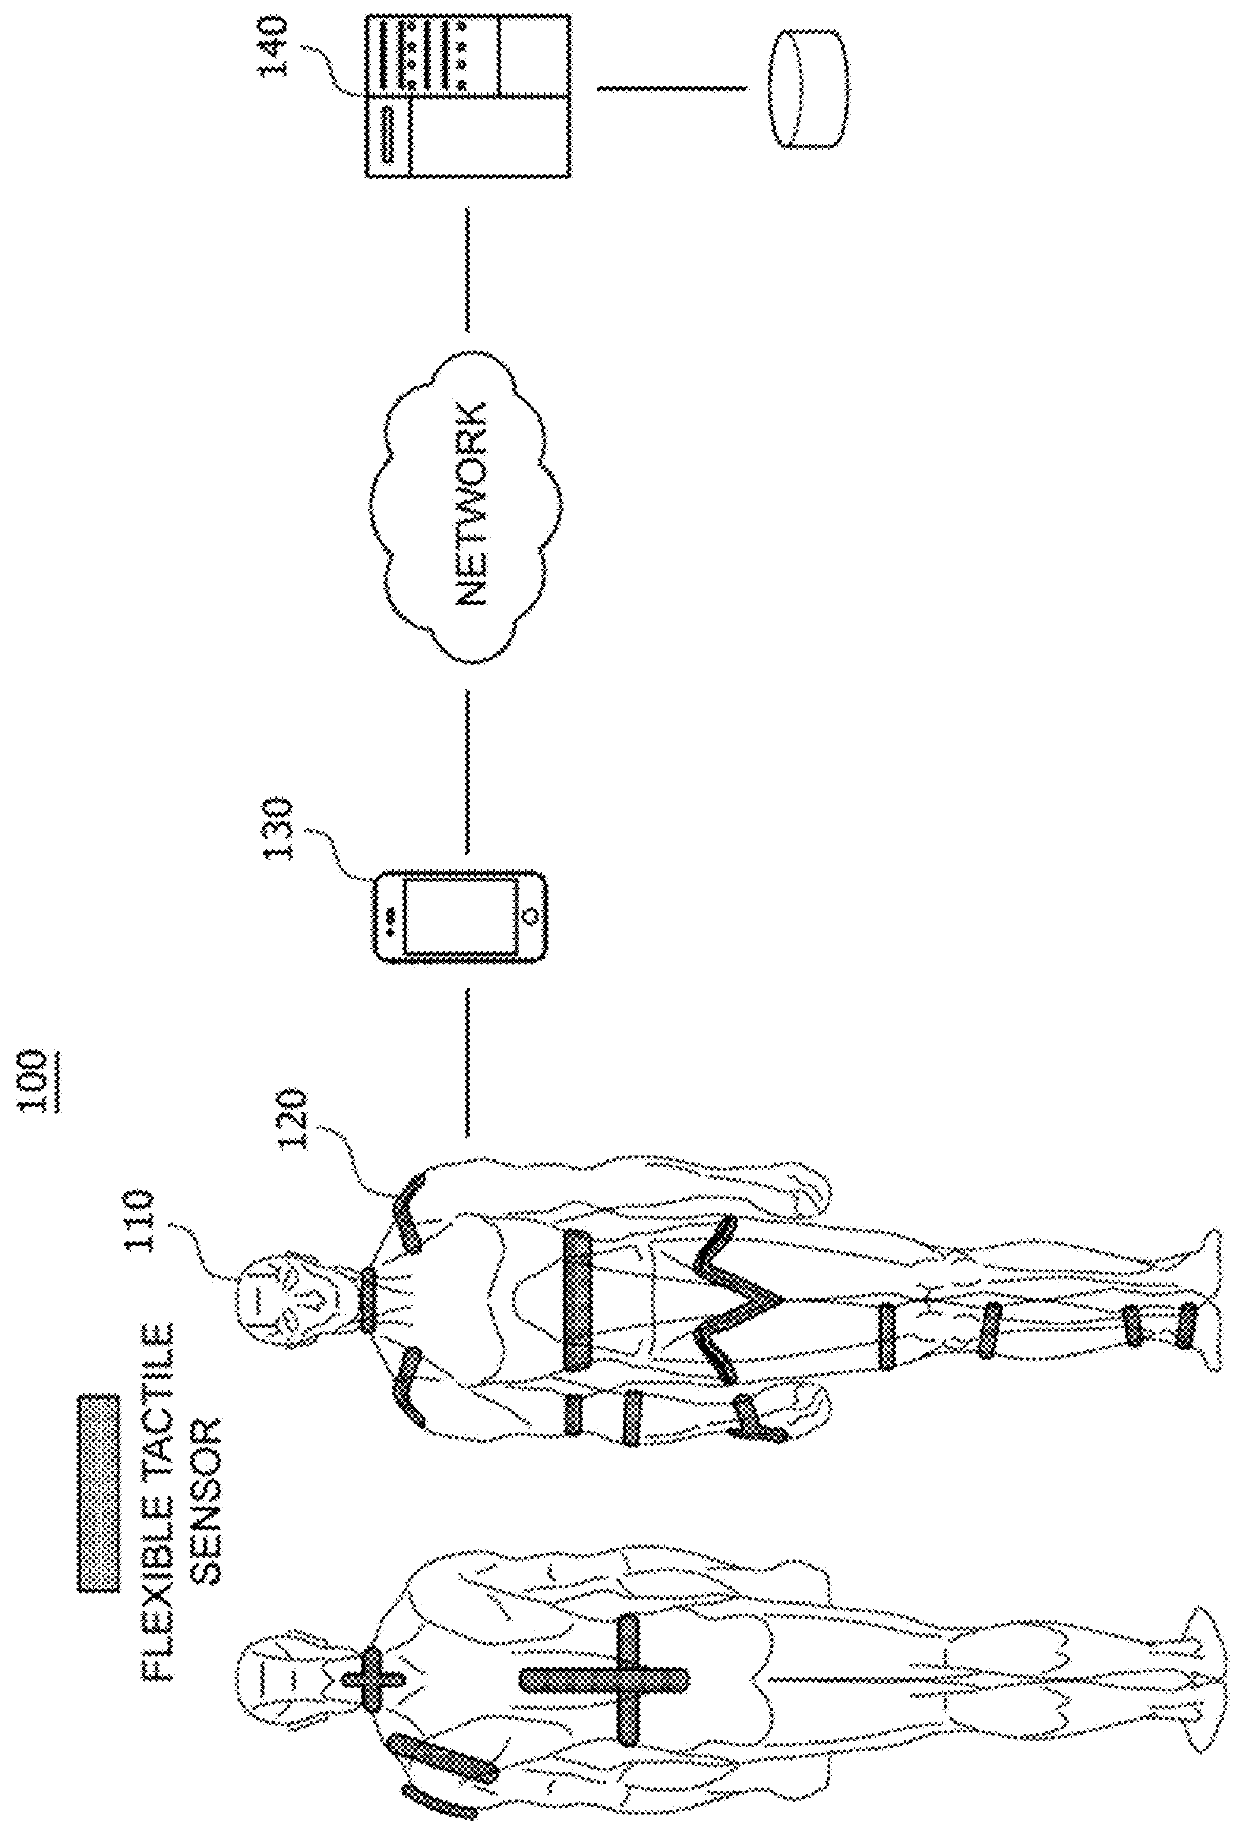 User movement monitoring method and system performing the same